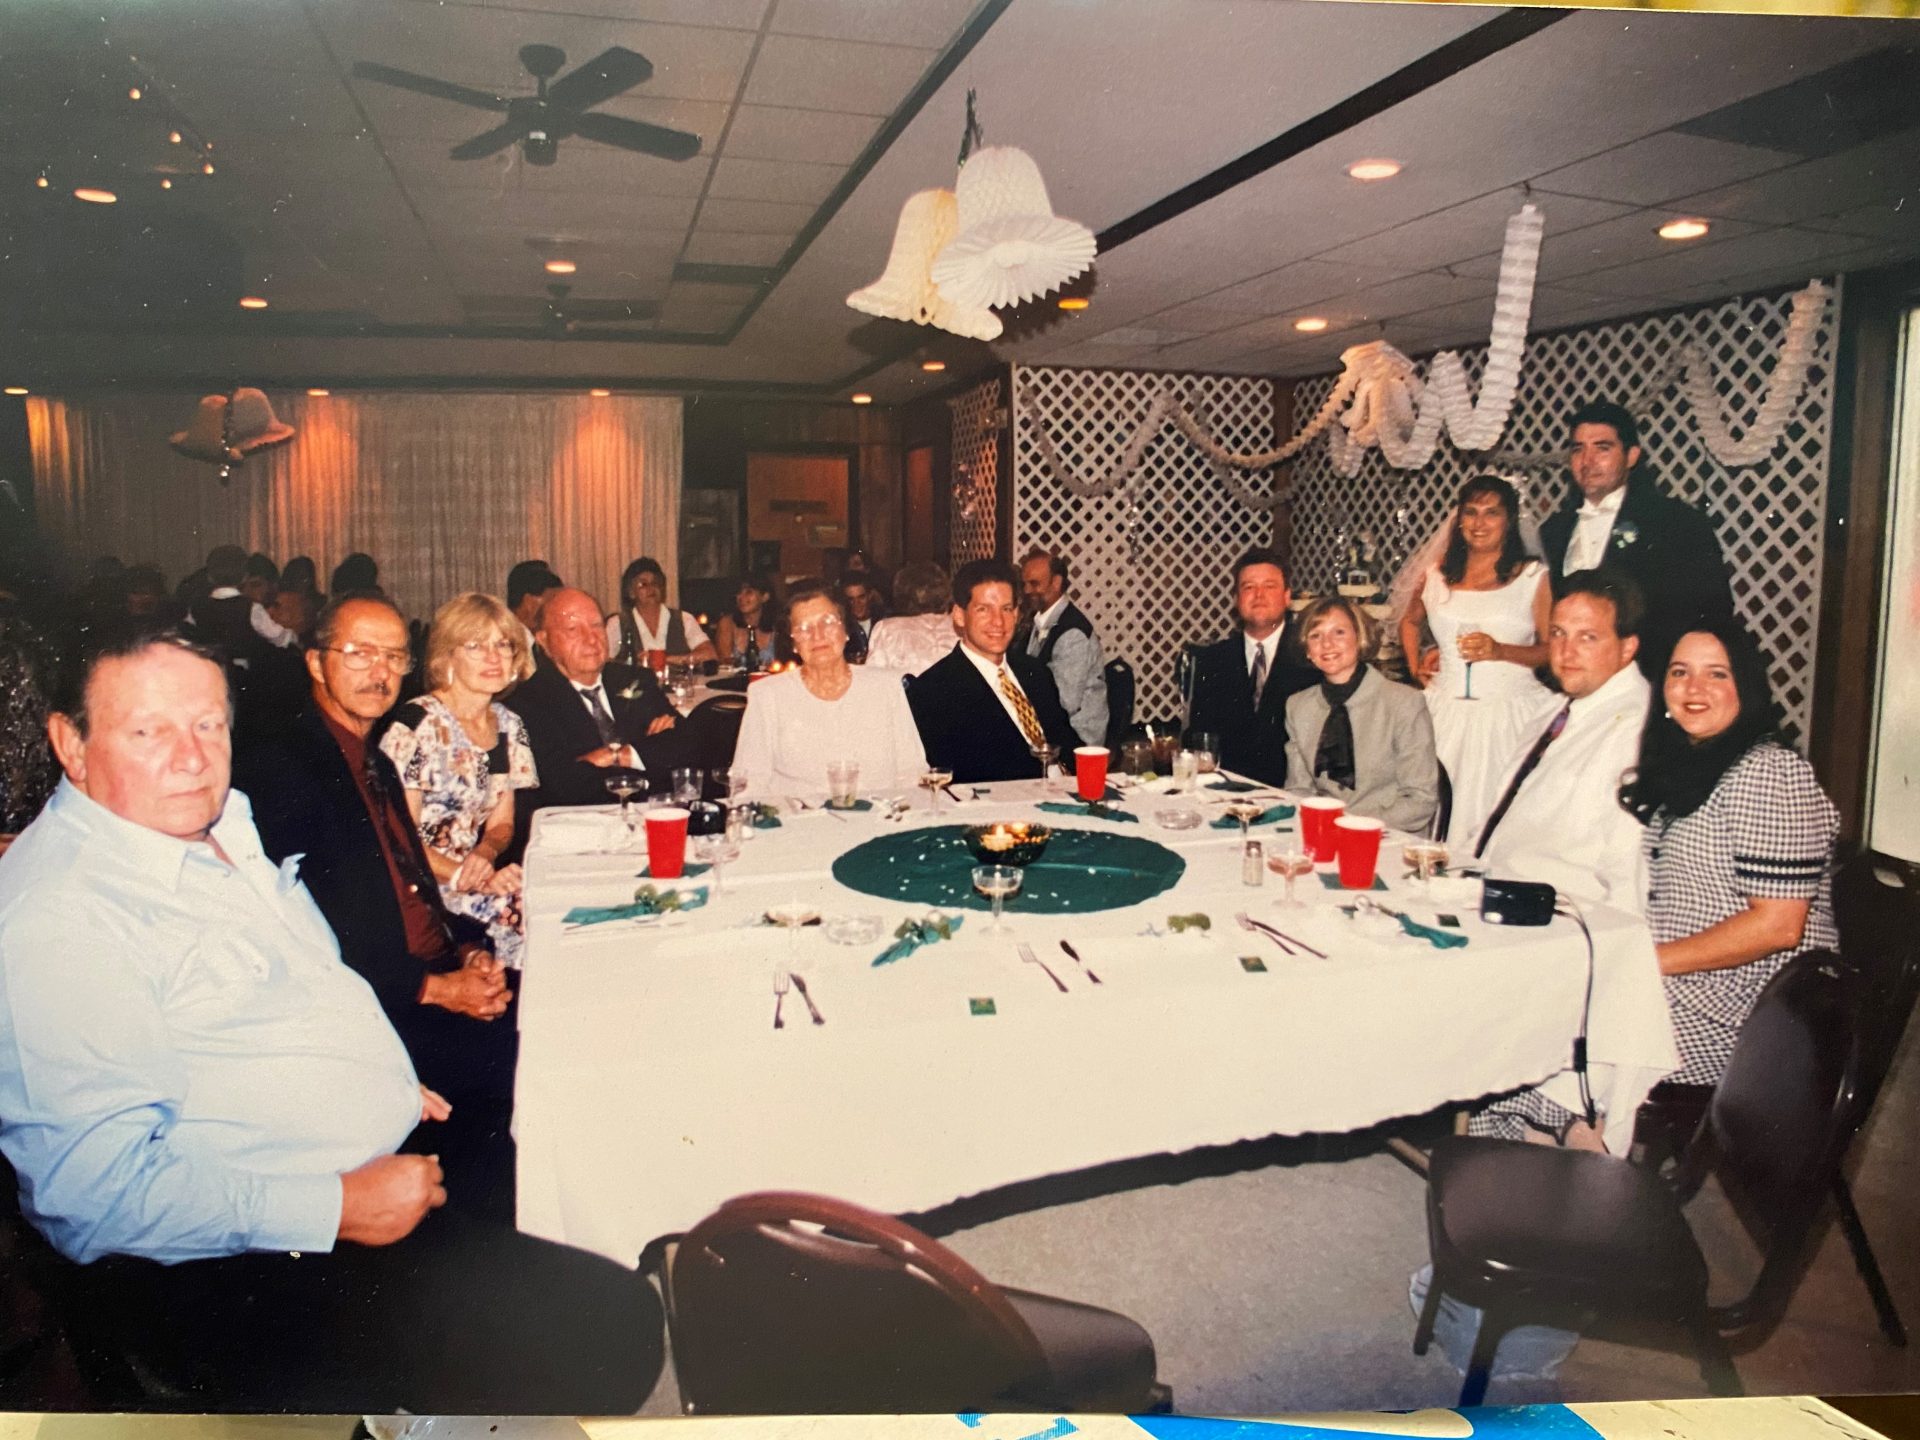 Michelle - Wedding:  Bobby Simpson, Wayne  and Mary Hamlin (Bobby's sister) , John and Margaret Simpson (Father and step mother), Paul Hamlin (nephew) , Mike Curry (nephew) , Michelle (niece) and James Duquette, Al (nephew) and Leslie Hamlin